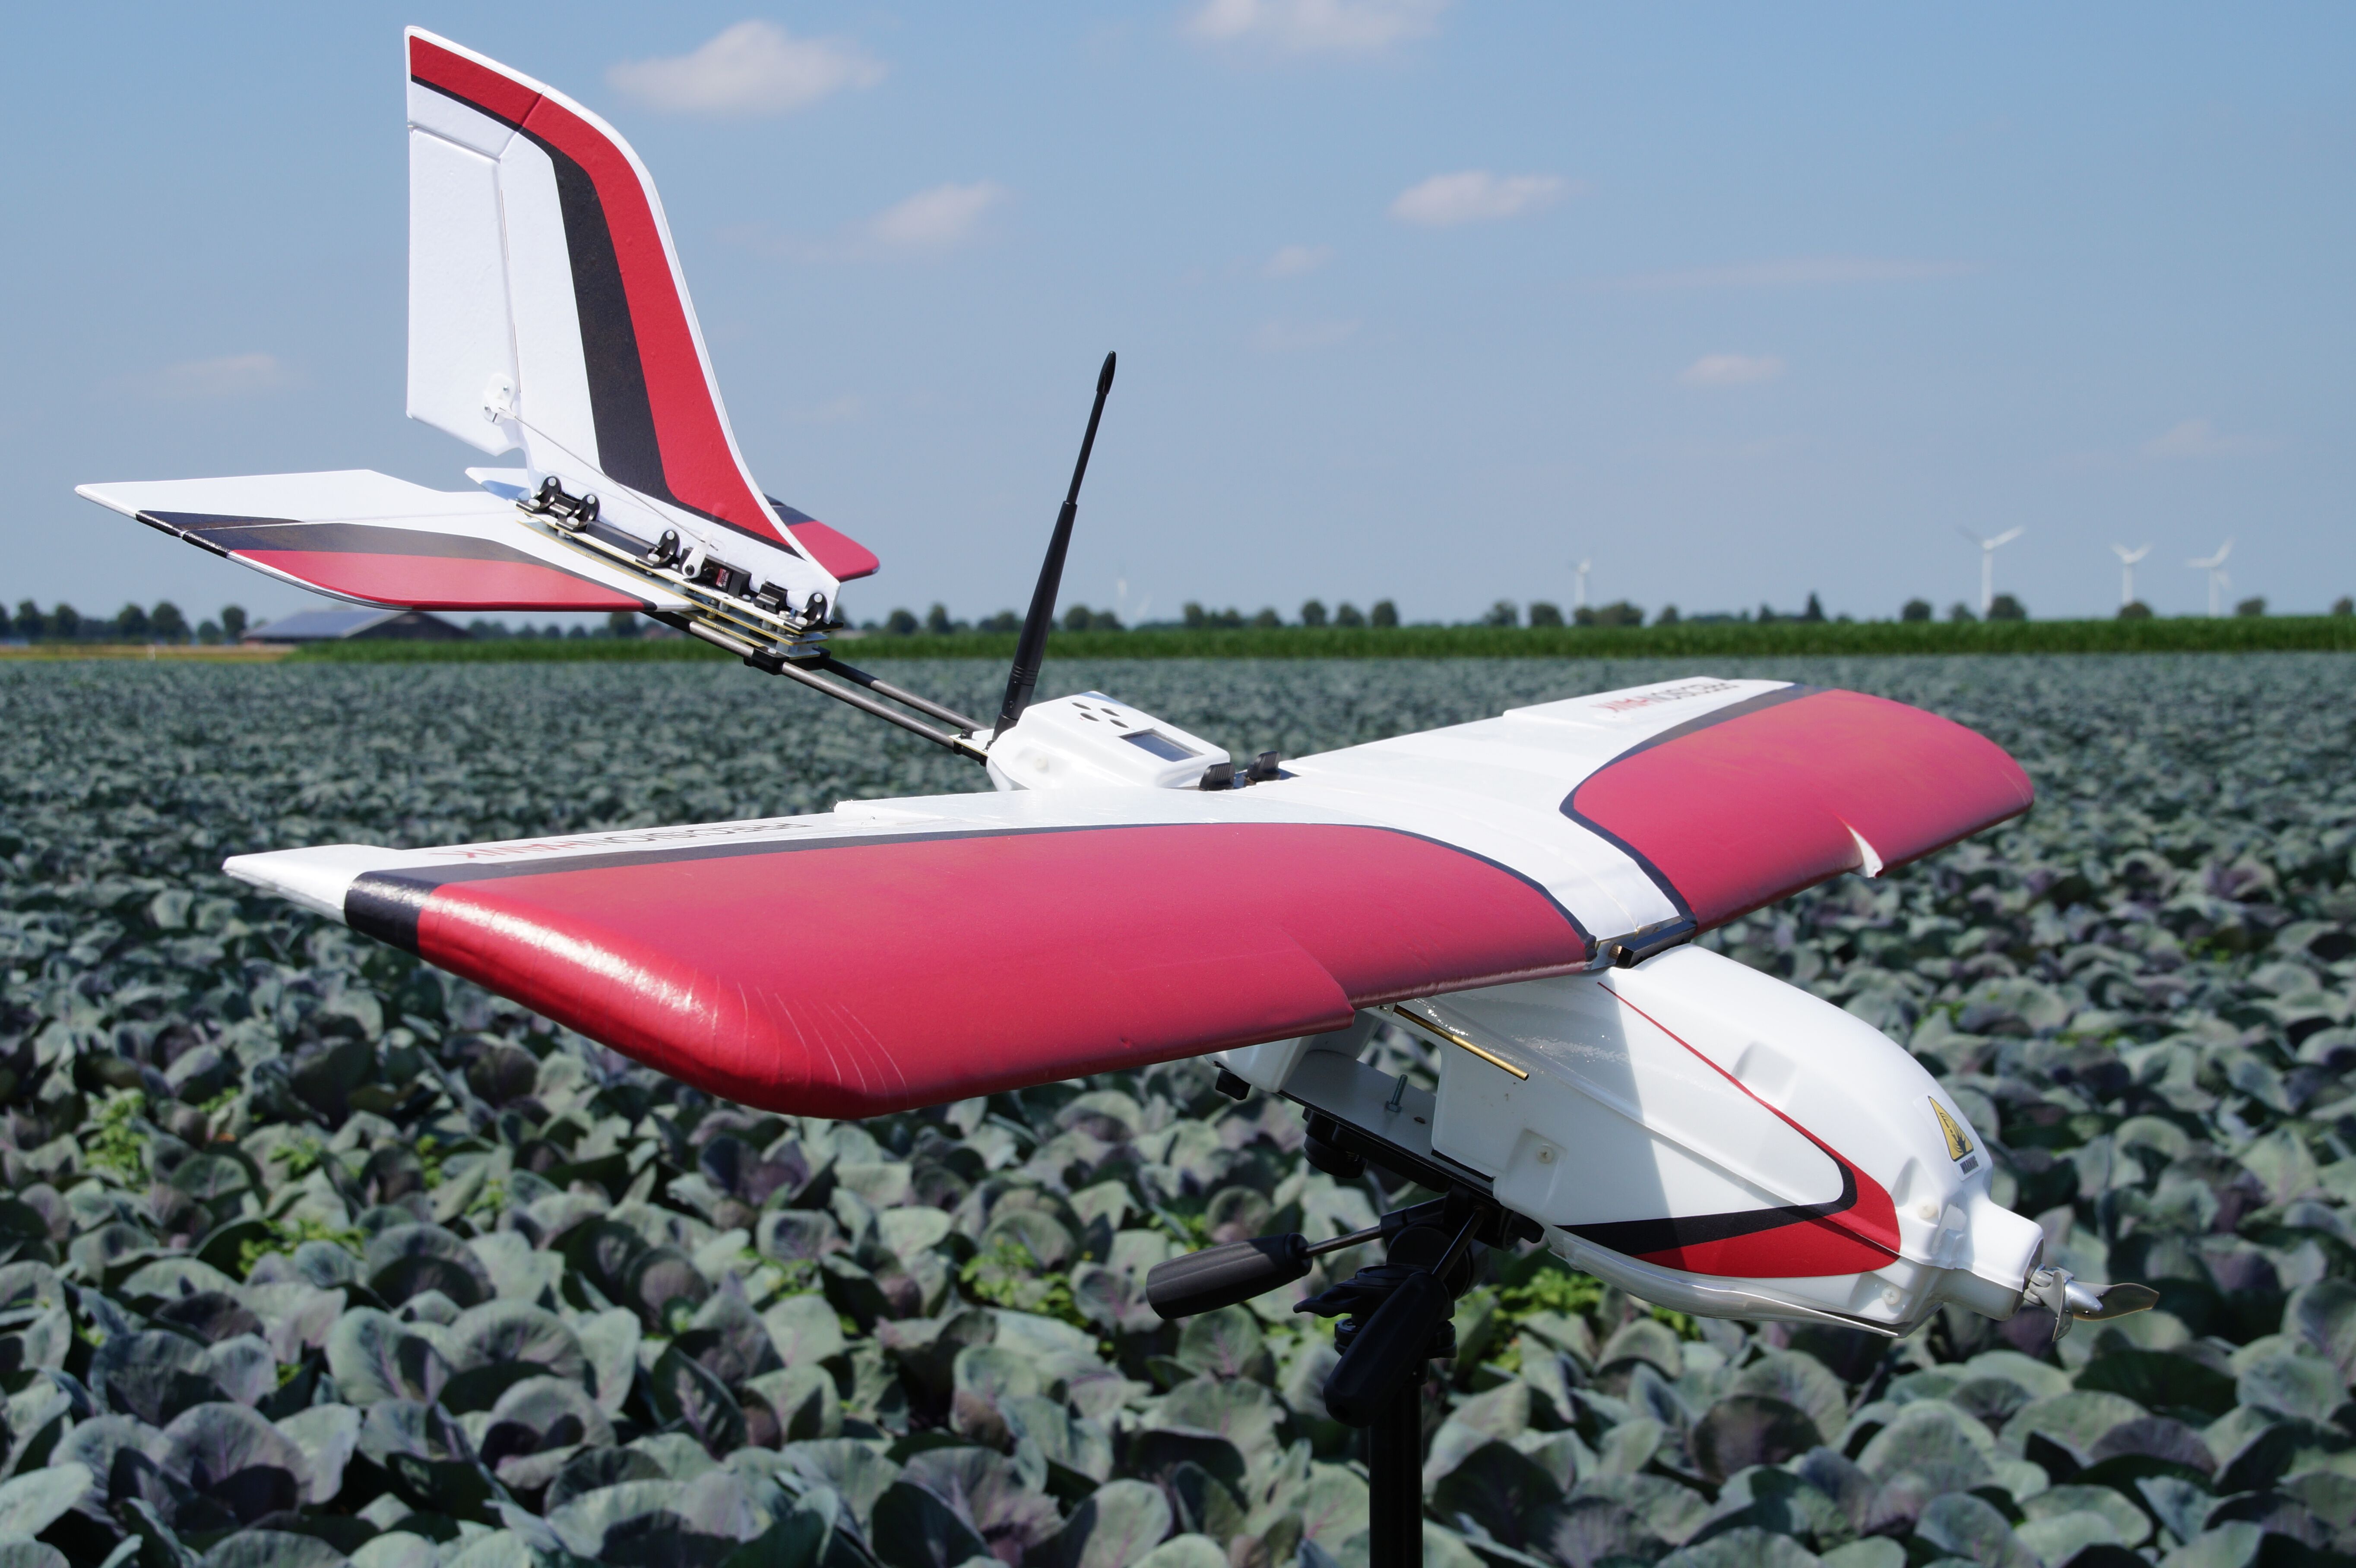 Kansas State University and PrecisionHawk developing UAS app that predicts corn production | Kansas State University | News and Services